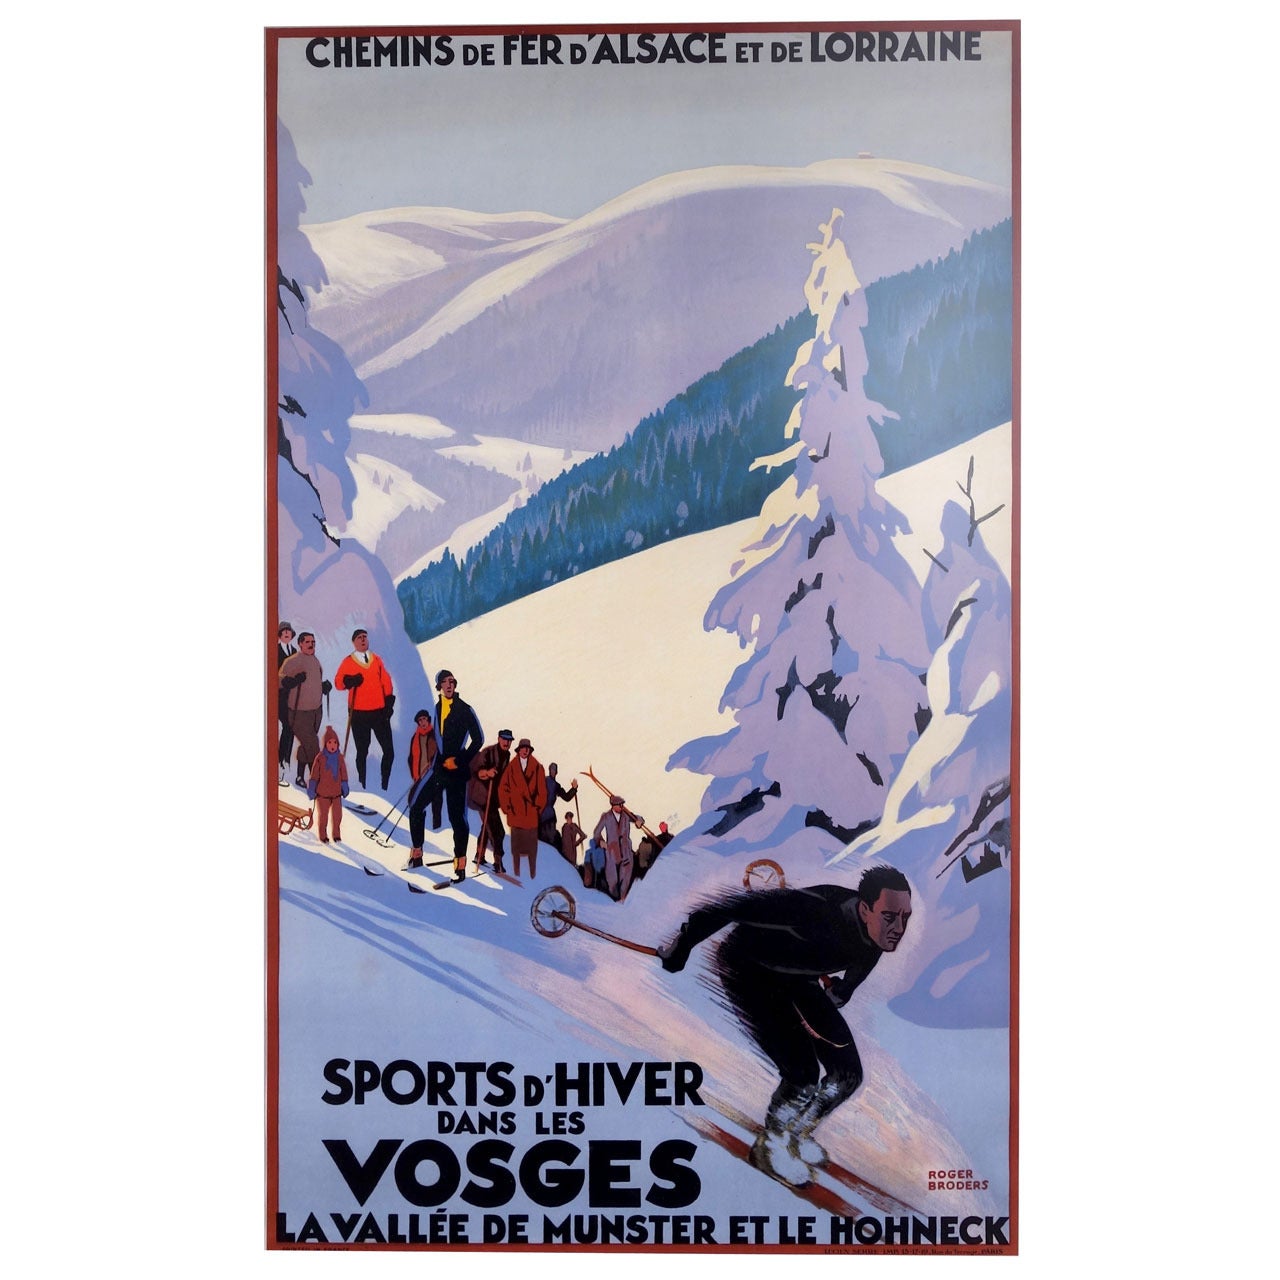 "Vintage French Ski Poster" by Roger Broders